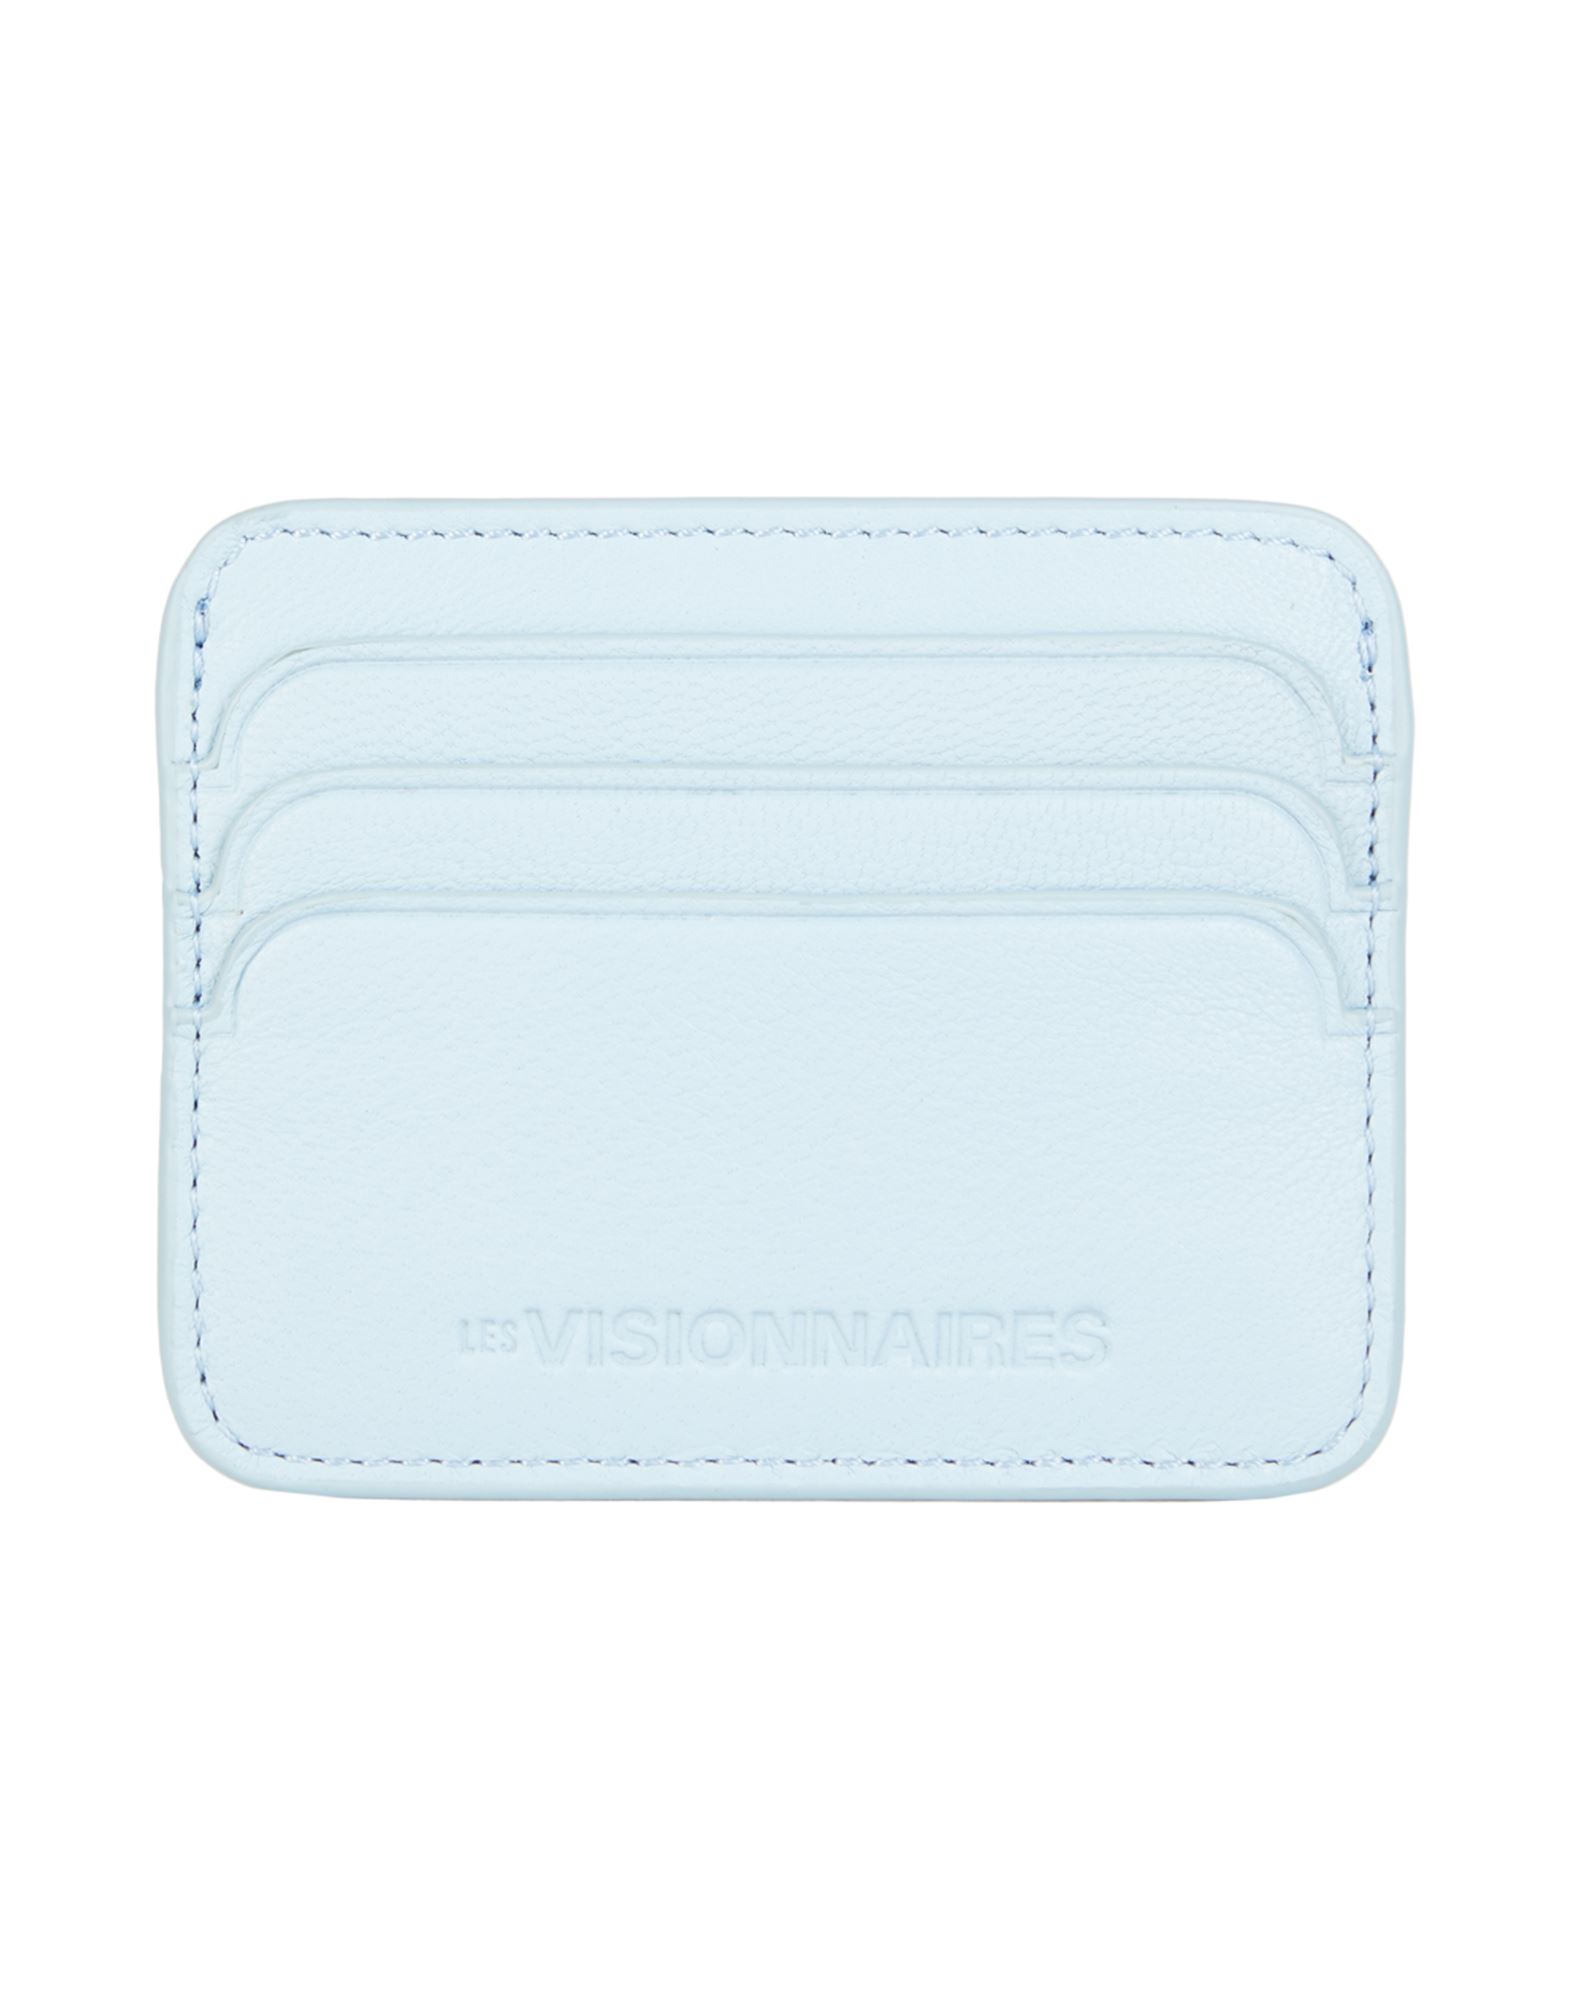 Les Visionnaires Document Holders In Blue